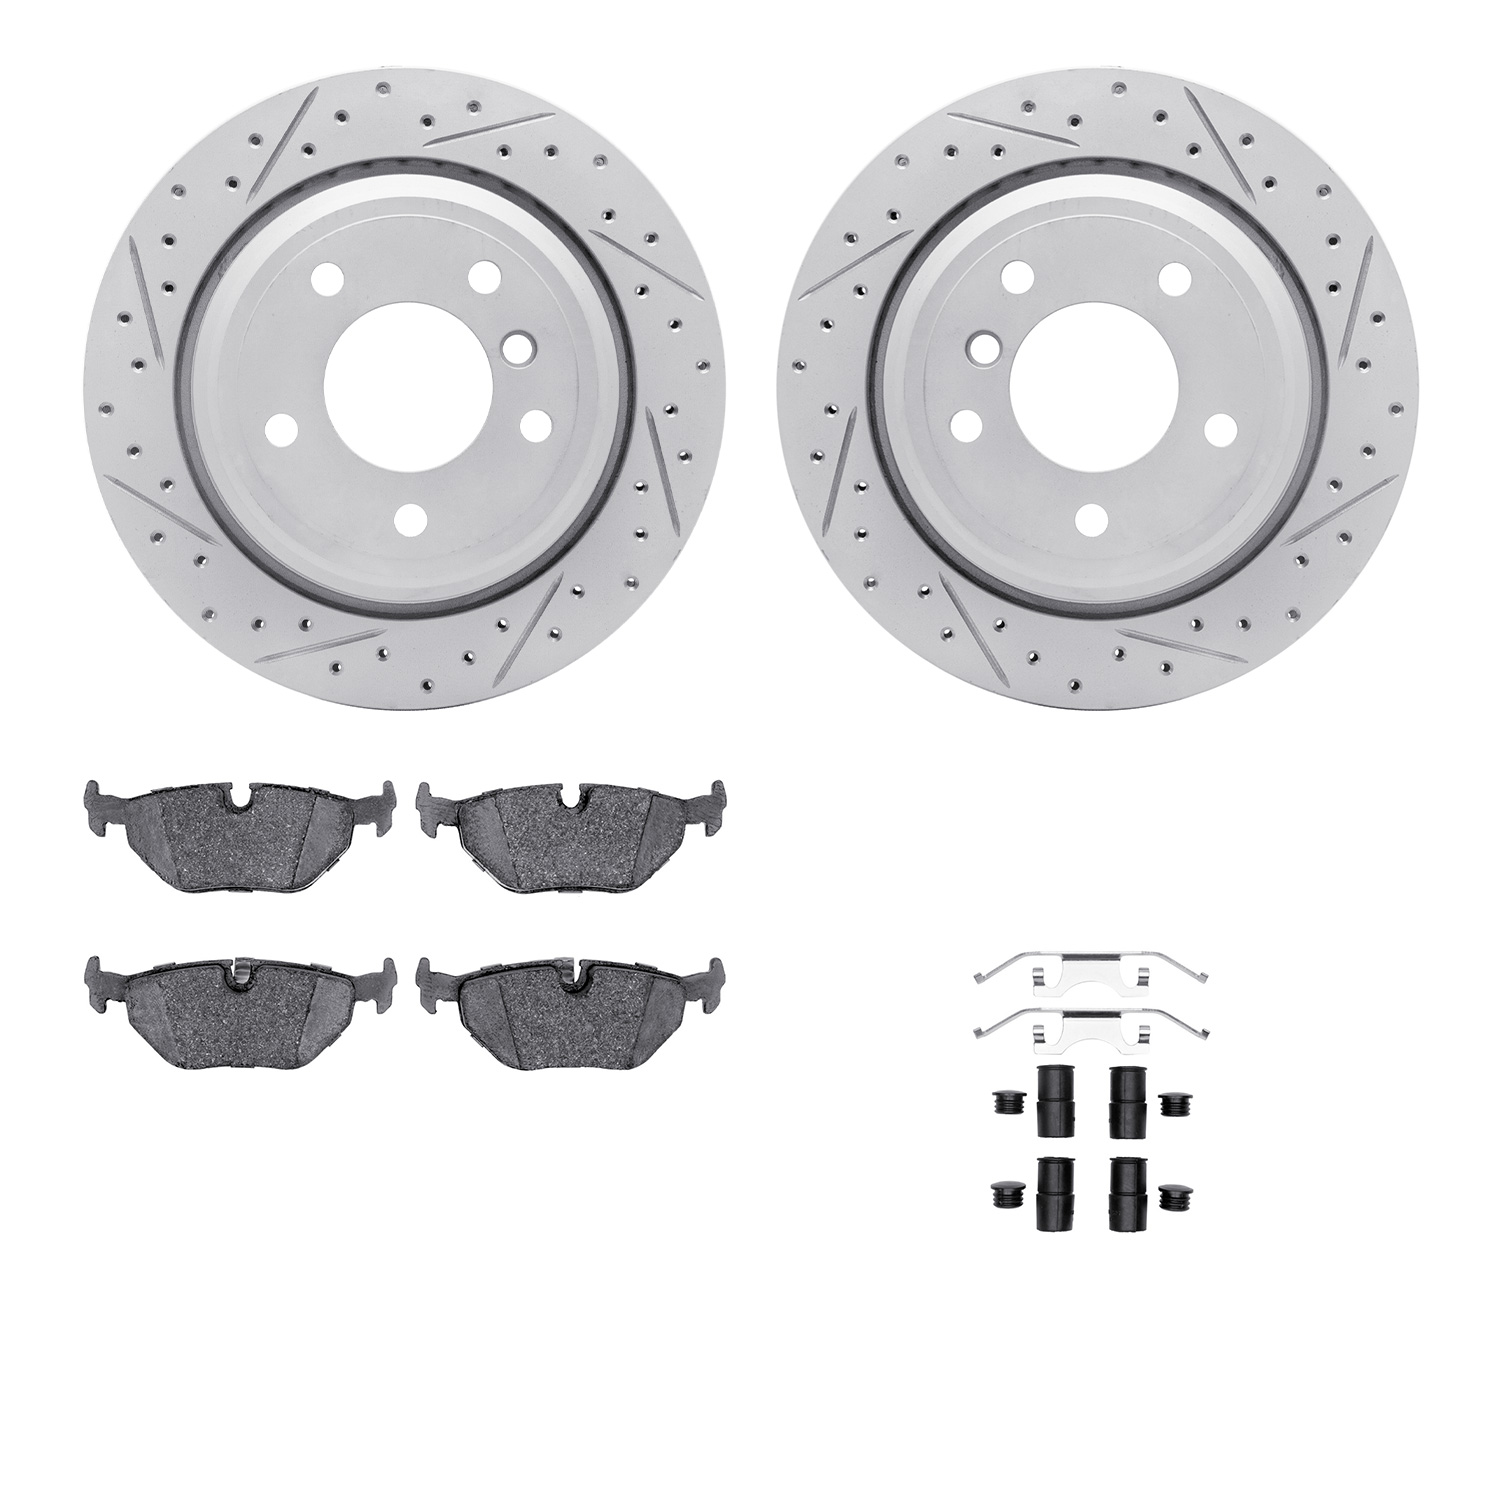 2512-31021 Geoperformance Drilled/Slotted Rotors w/5000 Advanced Brake Pads Kit & Hardware, 1996-2003 BMW, Position: Rear